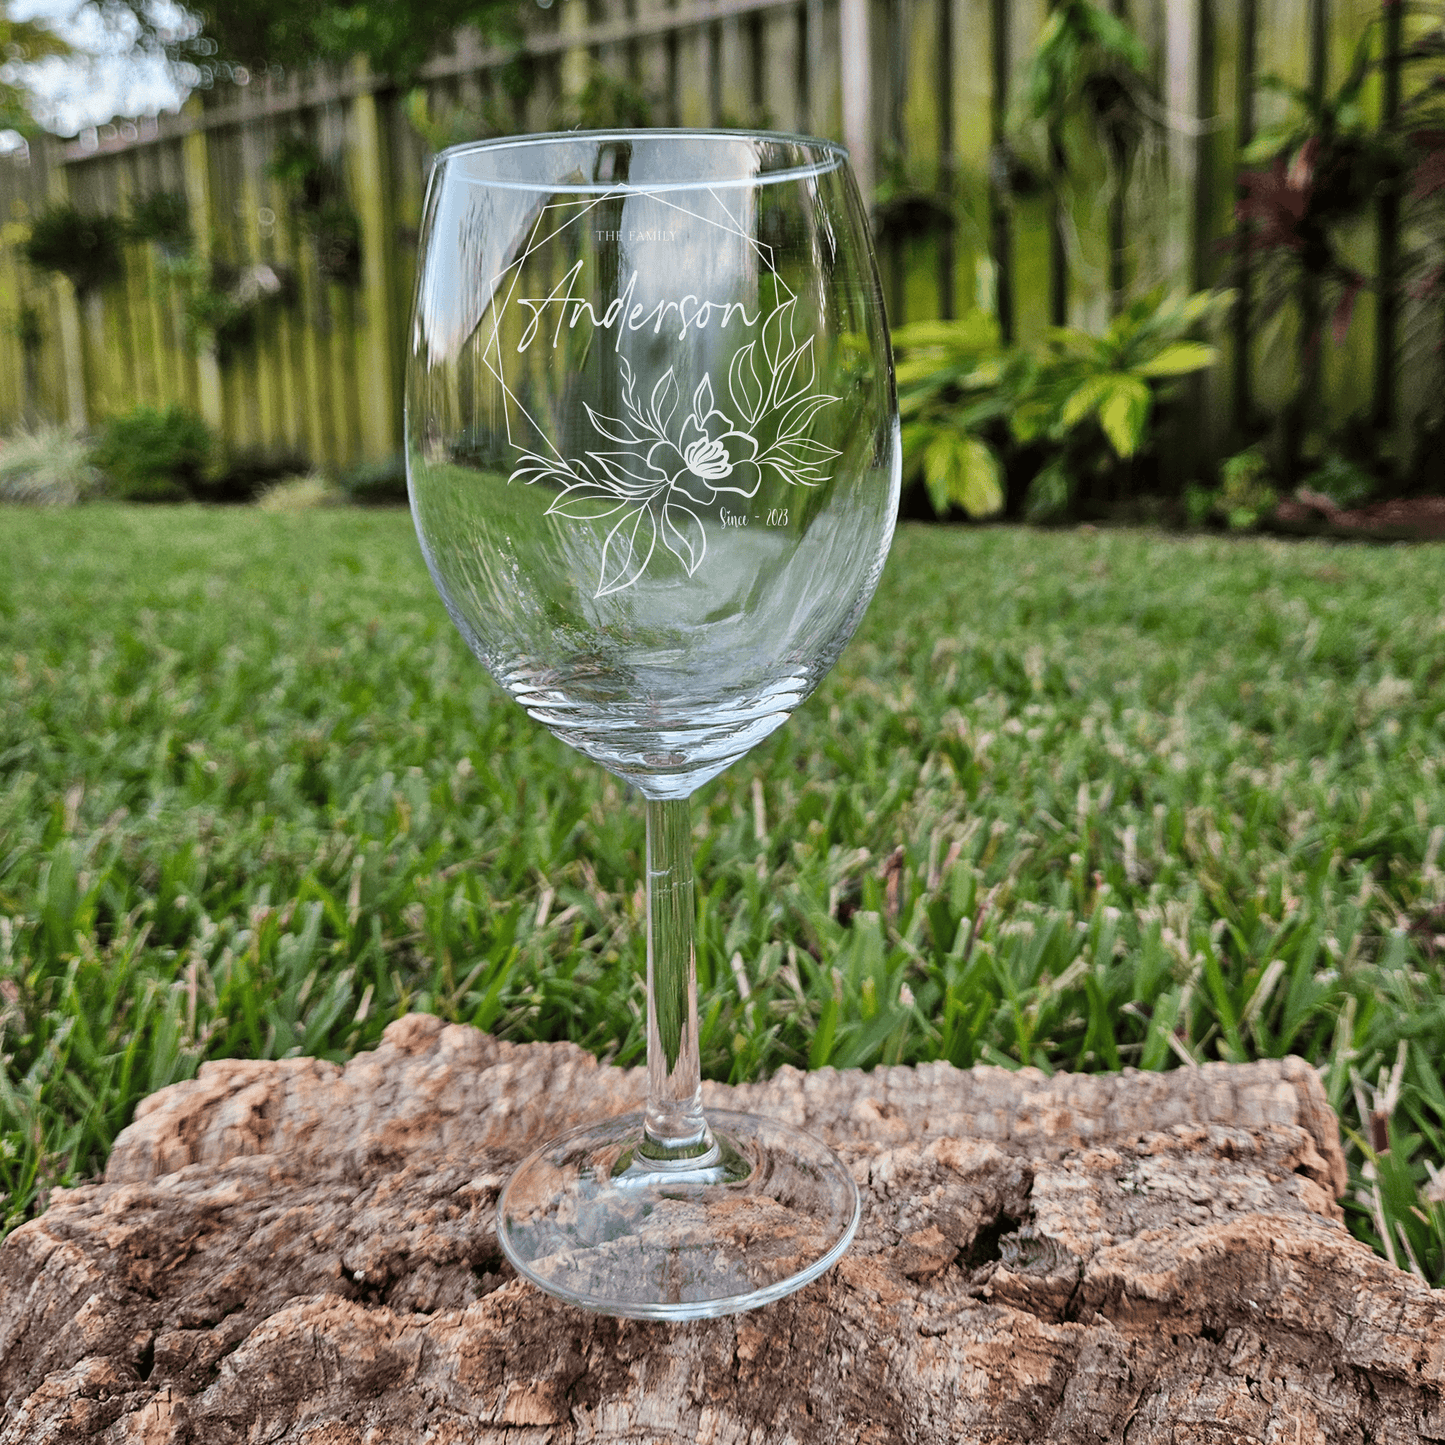 Personalized Wine Glasses Etched with Family Monogram - Perfect for Couples and Family Gifts - DM004